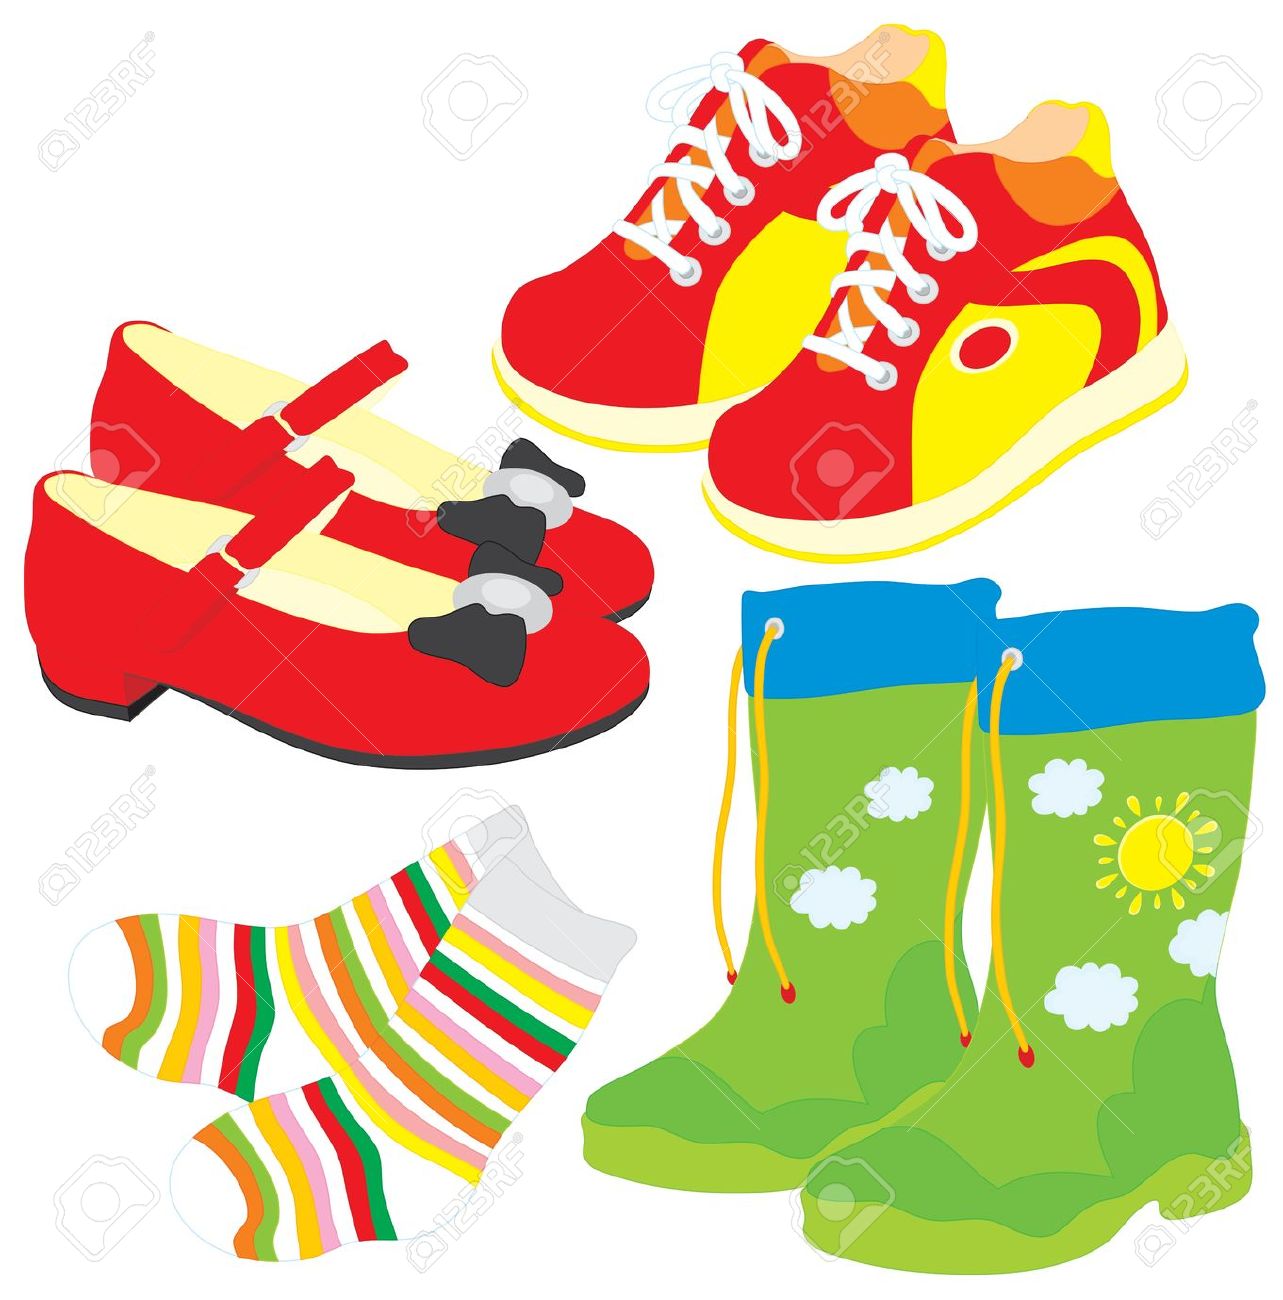 Shoes Clipart Socks Clipart Fashion Clipart Illustration Boots ...